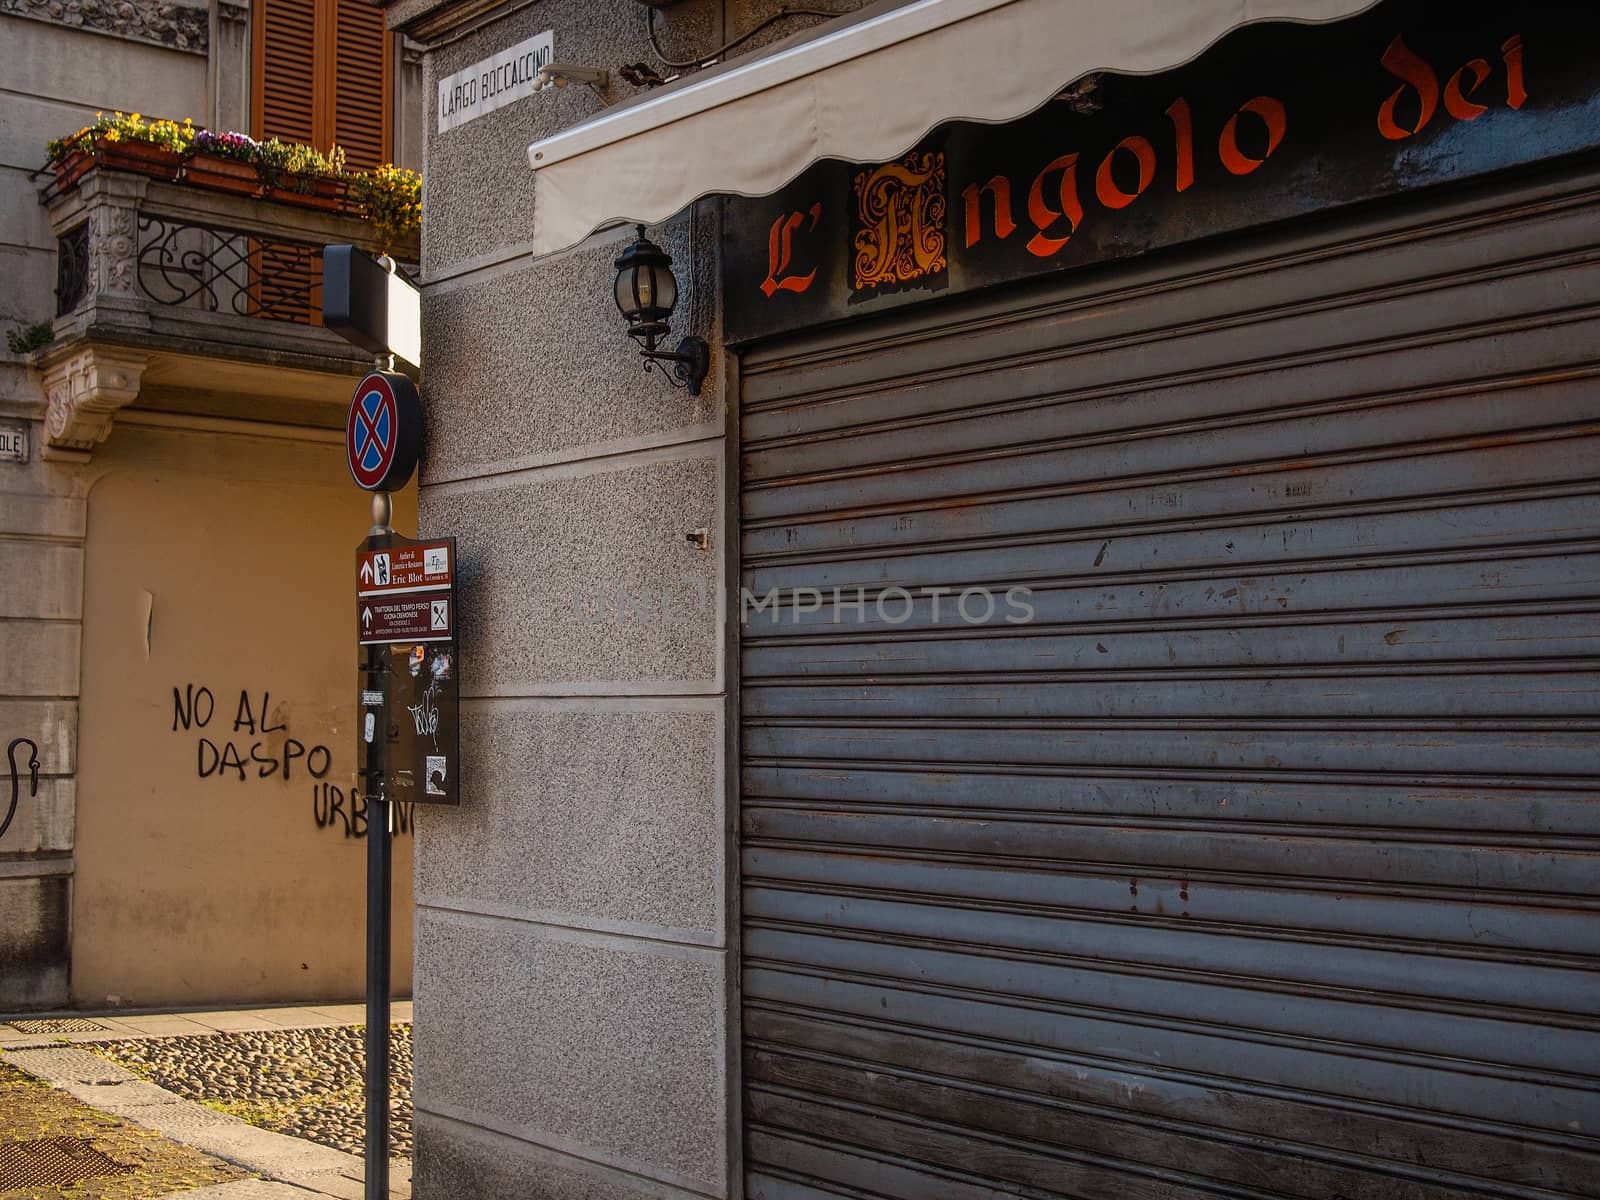 Cremona, Lombardy, Italy - April 30 th - May 1st 2020 - closed bars  and general commerce  during coronavirus lockdown and economic crisis. Italian signs